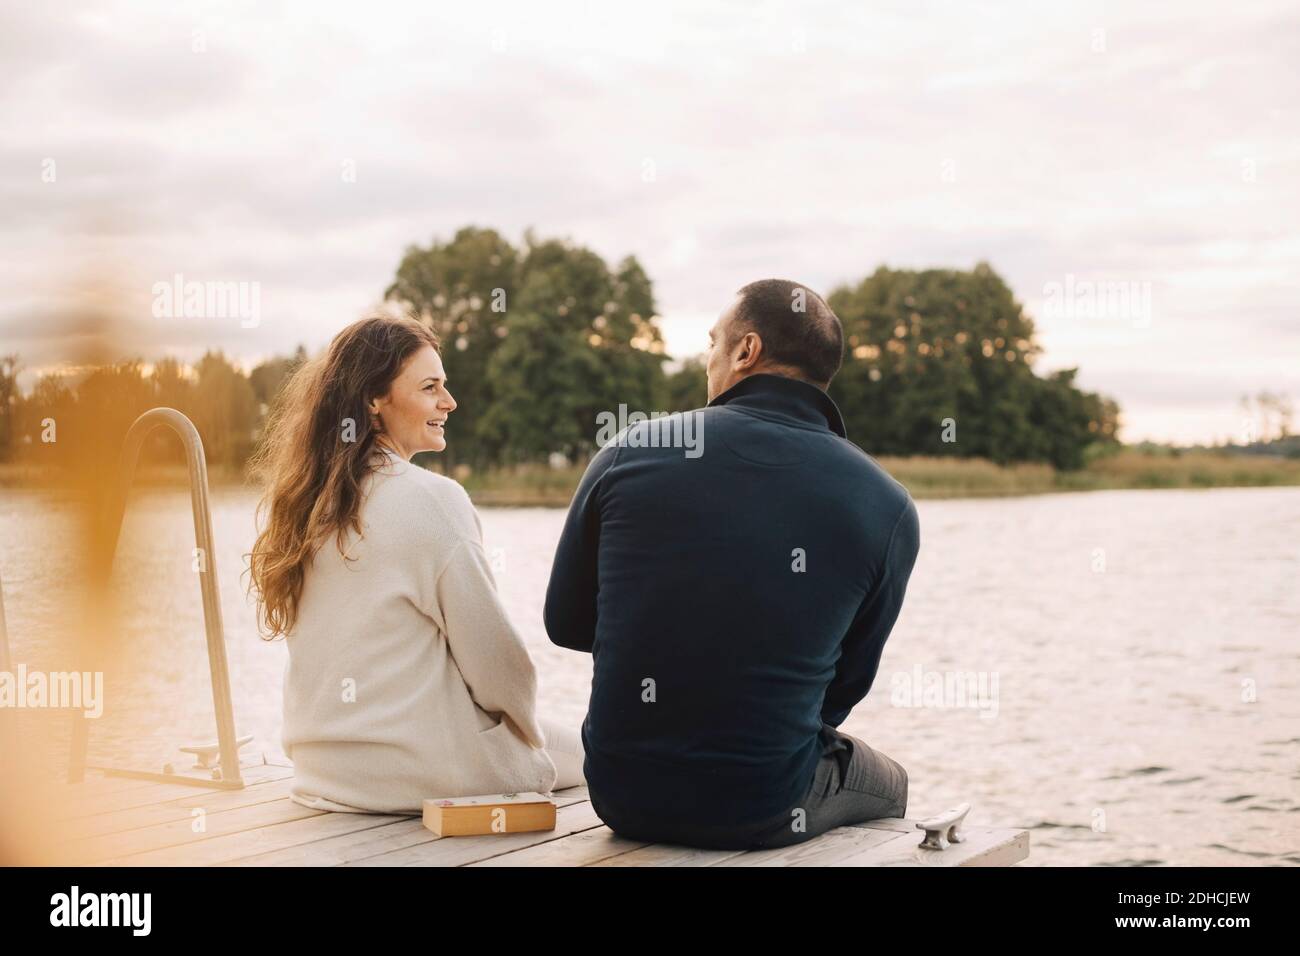 Smiling couple talking while sitting on jetty by lake against sky Stock Photo